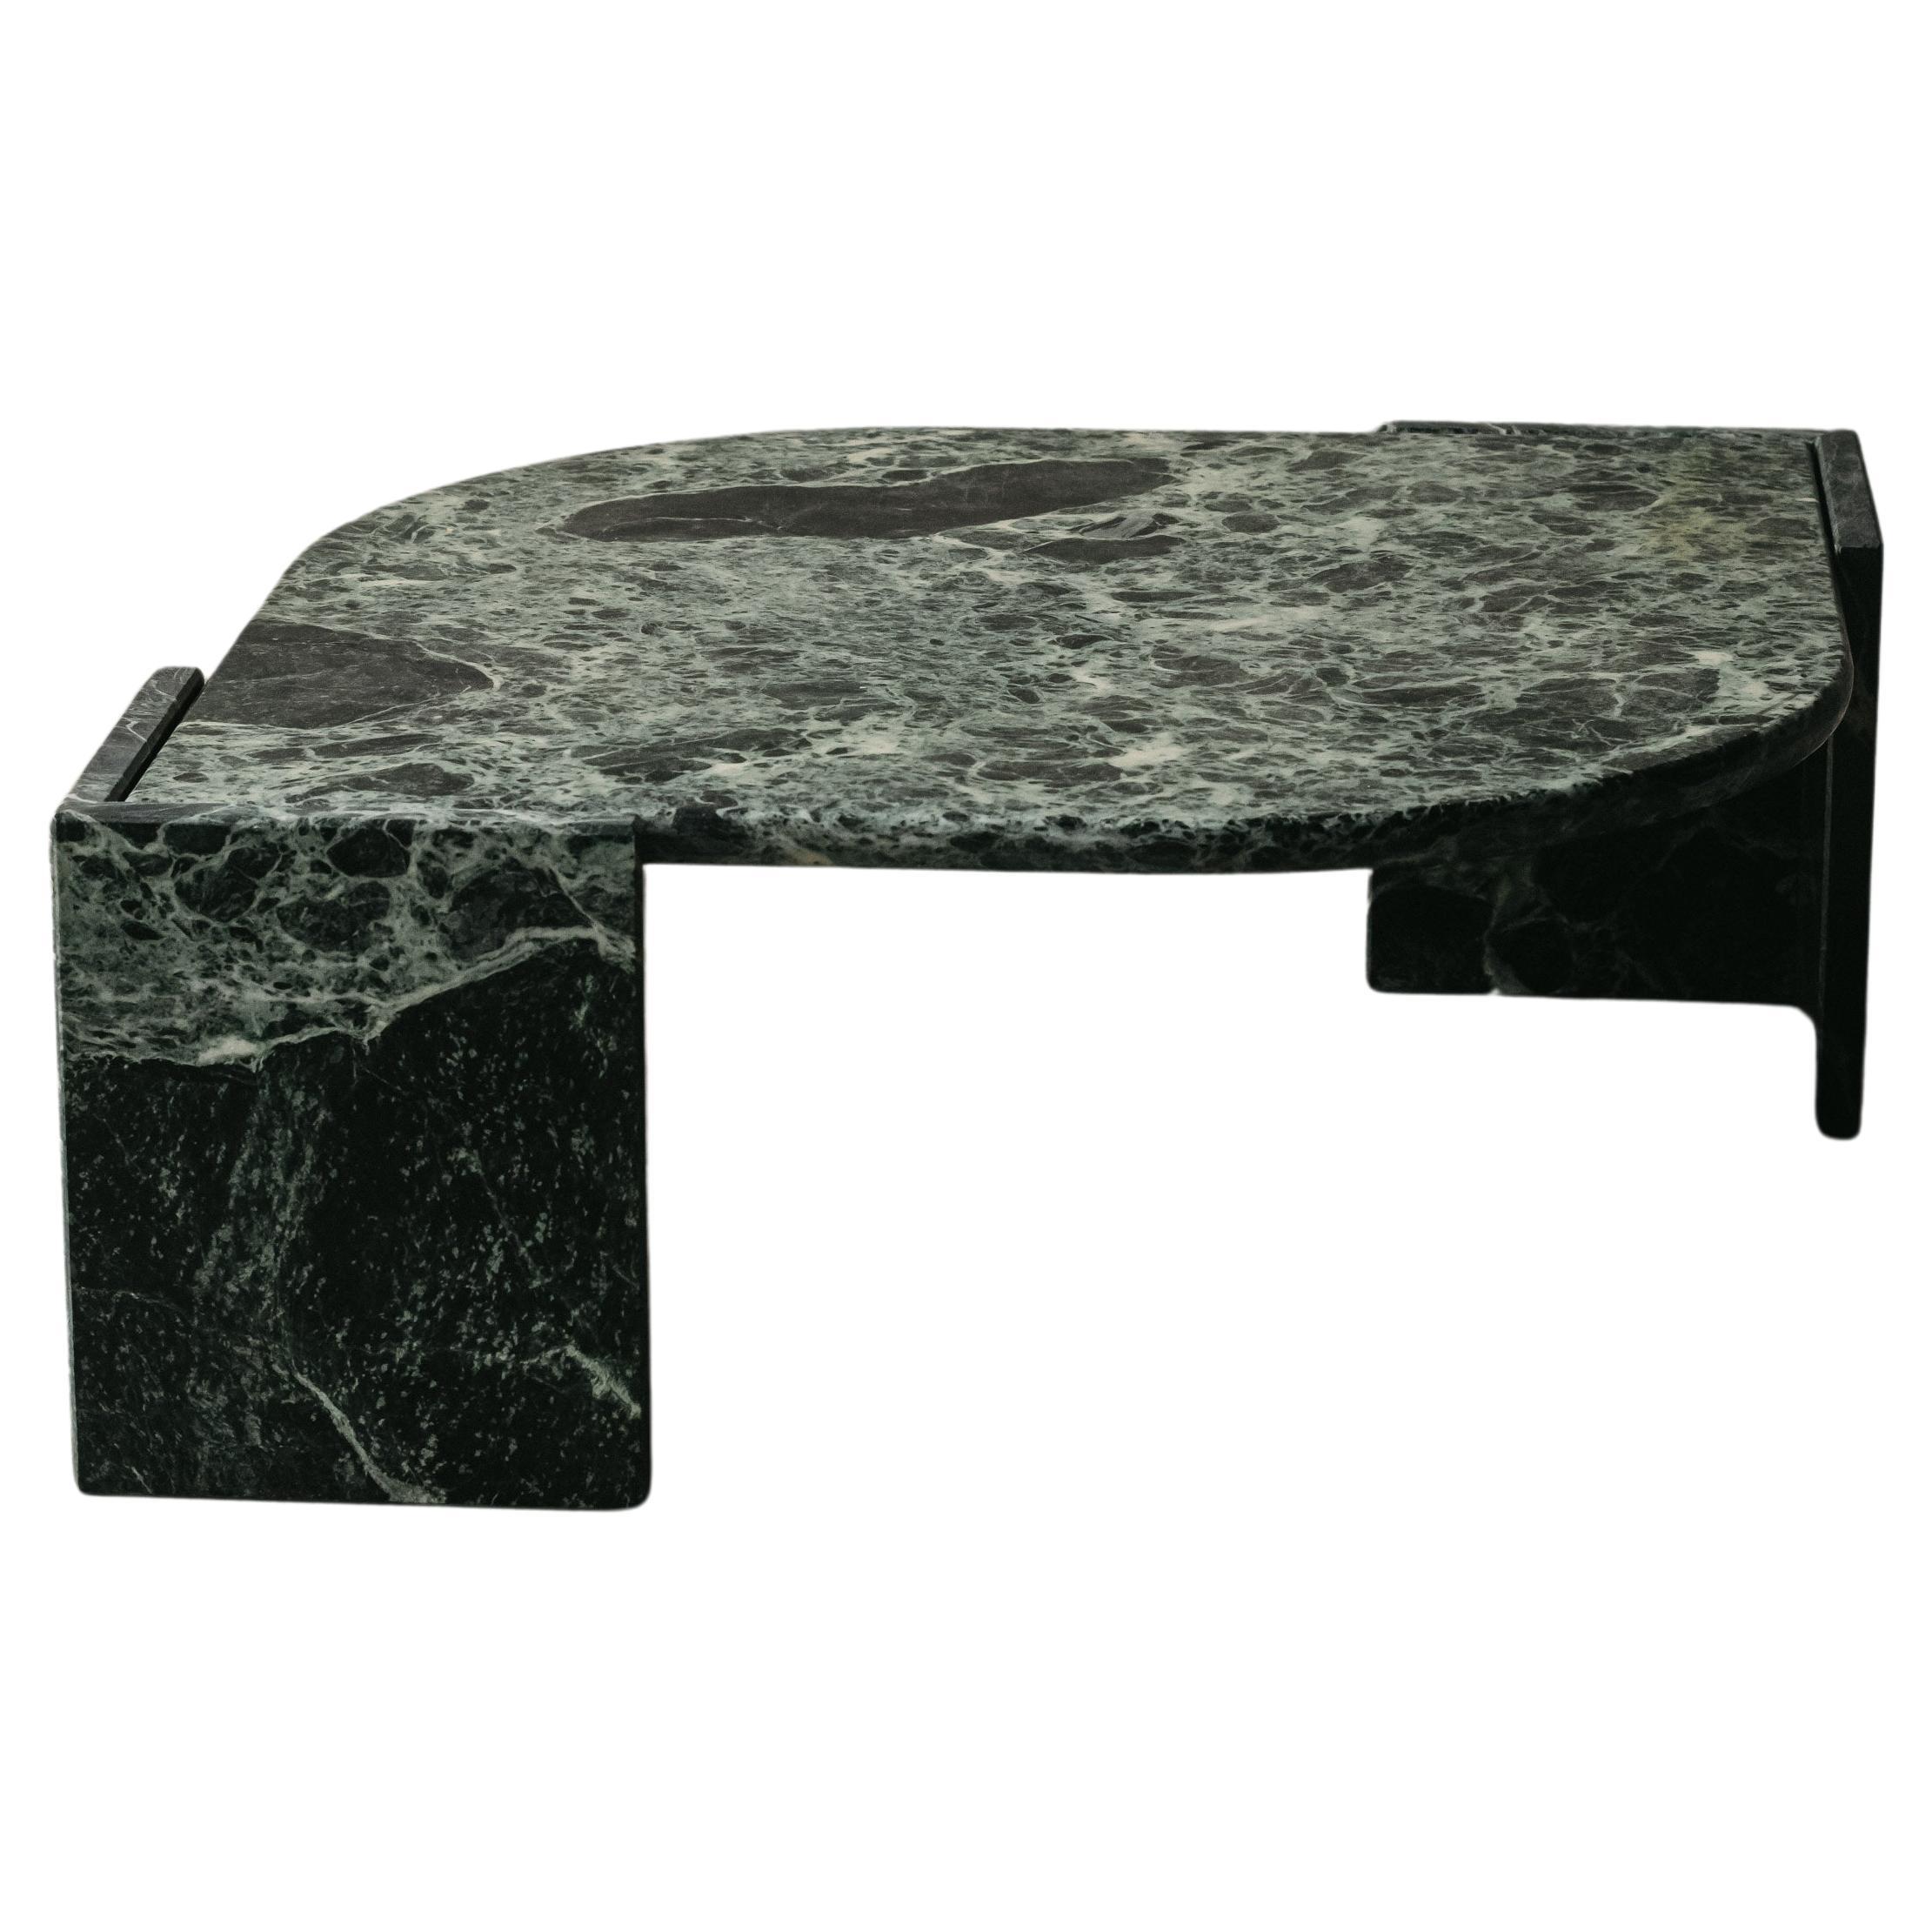 Vintage Green Marble Coffee Table From Italy, Circa 1970